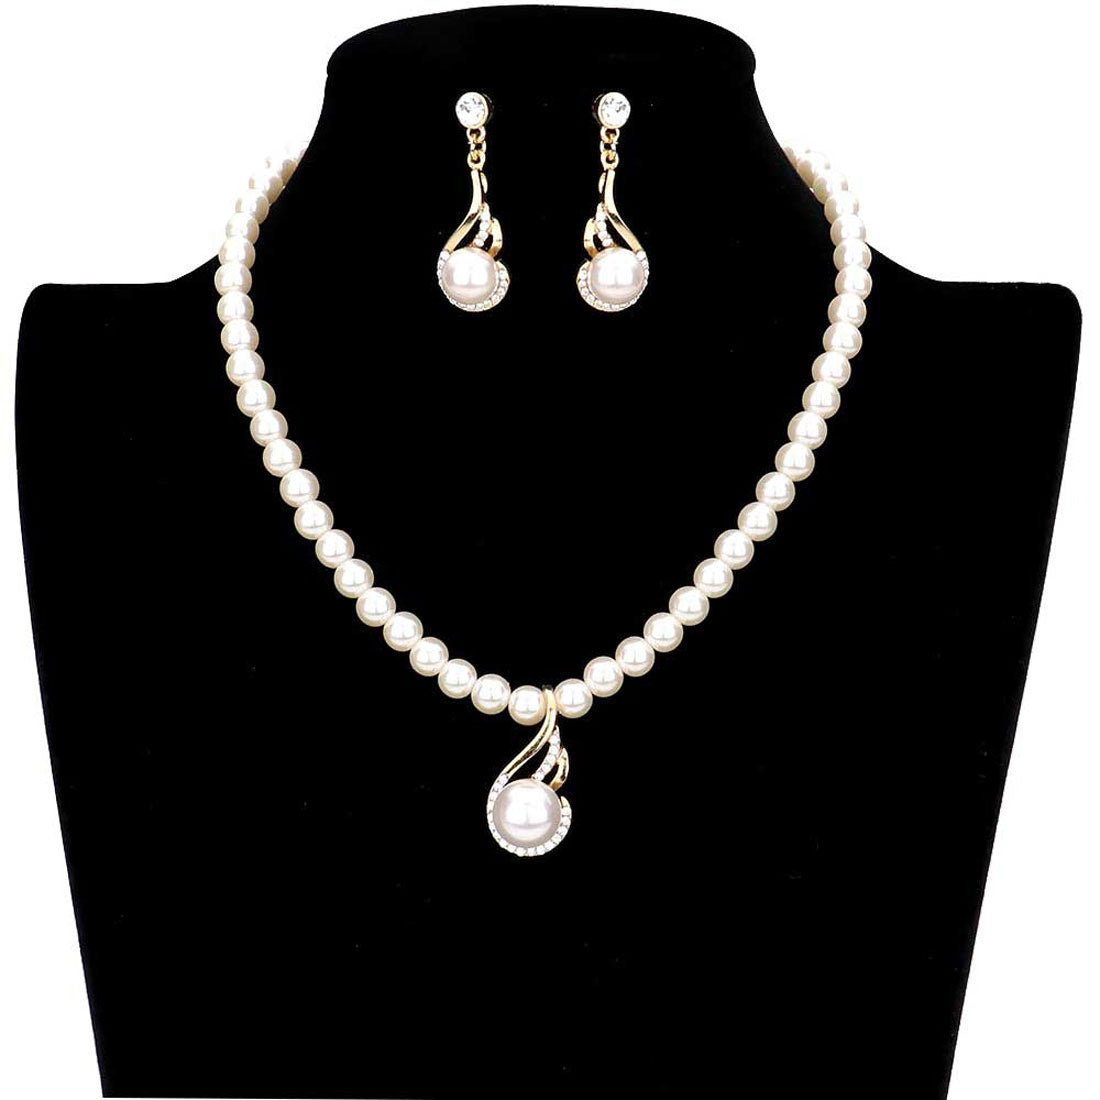 Cream Crystal Rhinestone Pearl Accented Necklace. Beautifully crafted design adds a gorgeous glow to any outfit. Get ready with these stone Necklace and a bright Bracelet. Perfect for adding just the right amount of shimmer & shine and a touch of class to special events. Suitable for wear Party, Wedding, Date Night or any special events. Perfect Birthday, Anniversary, Prom Jewellery, Thank you Gift. 